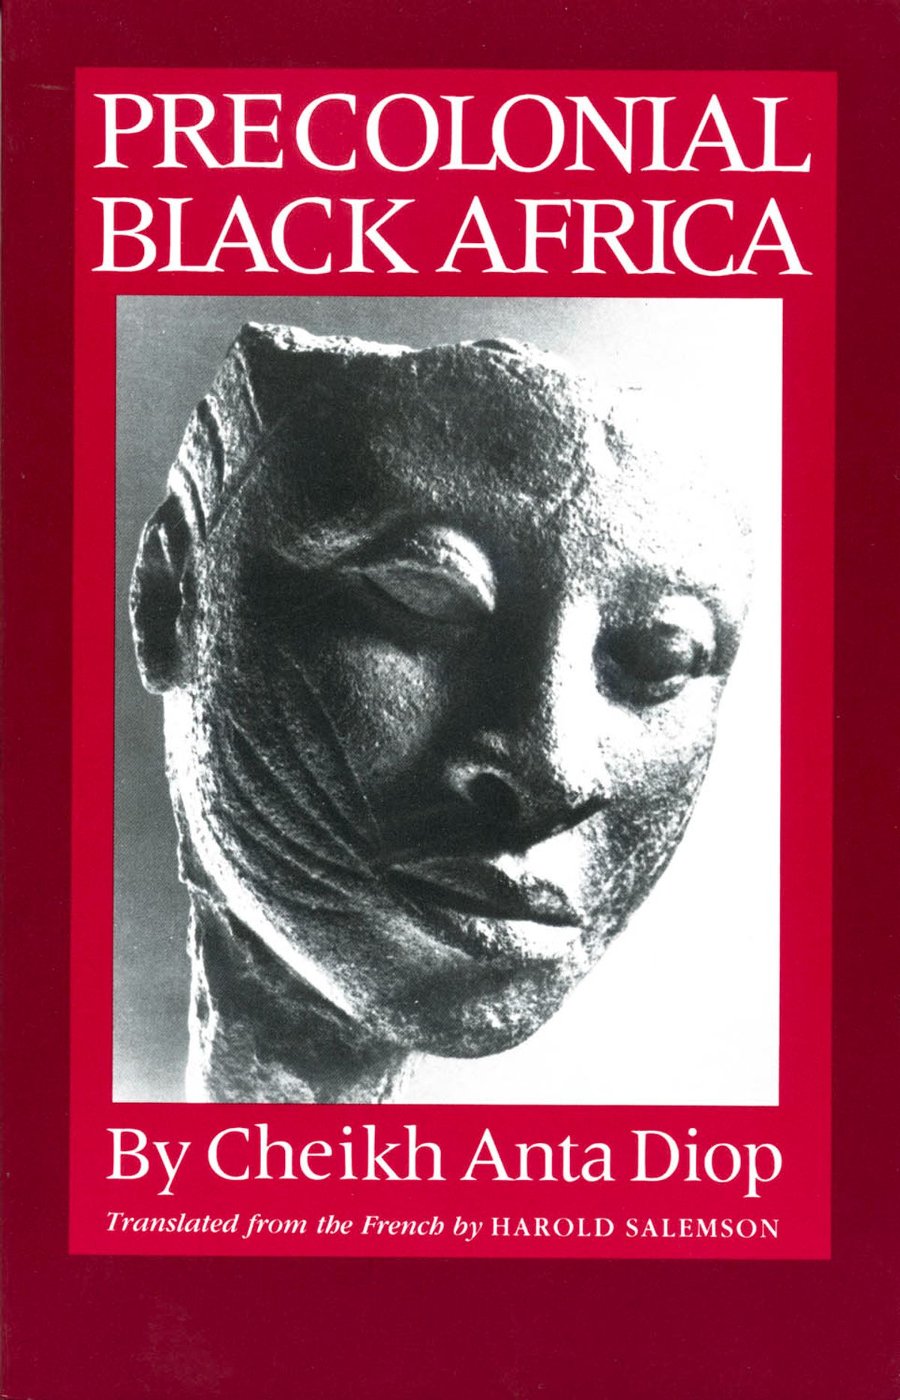 precolonial black africa books for gifts